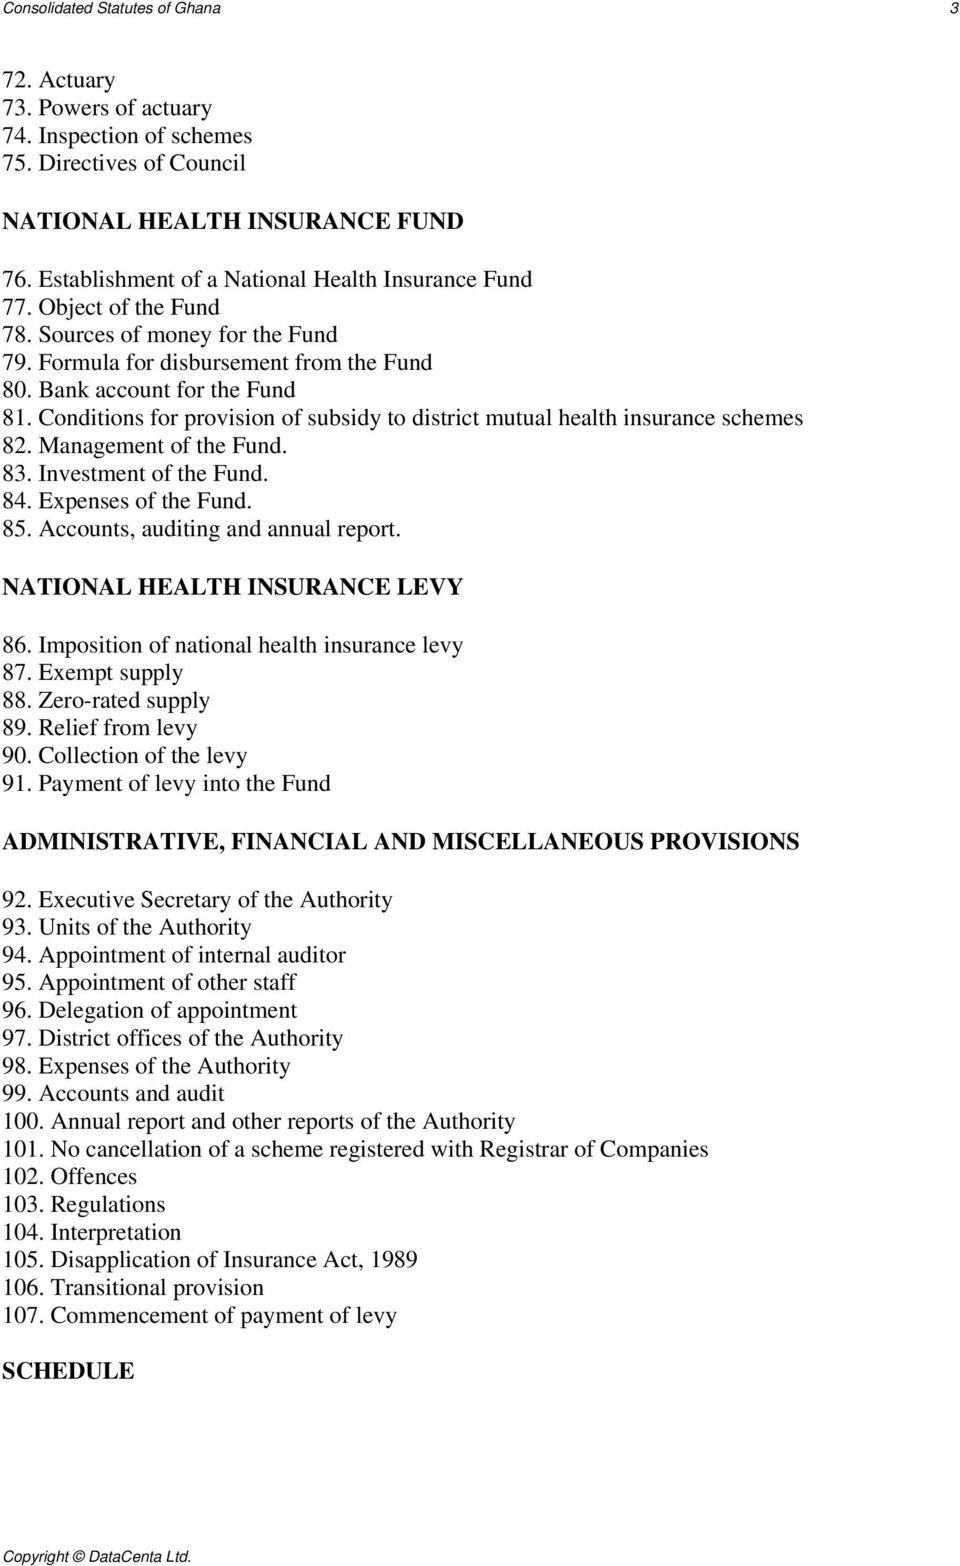 Conditions for provision of subsidy to district mutual health insurance schemes 82. Management of the Fund. 83. Investment of the Fund. 84. Expenses of the Fund. 85.